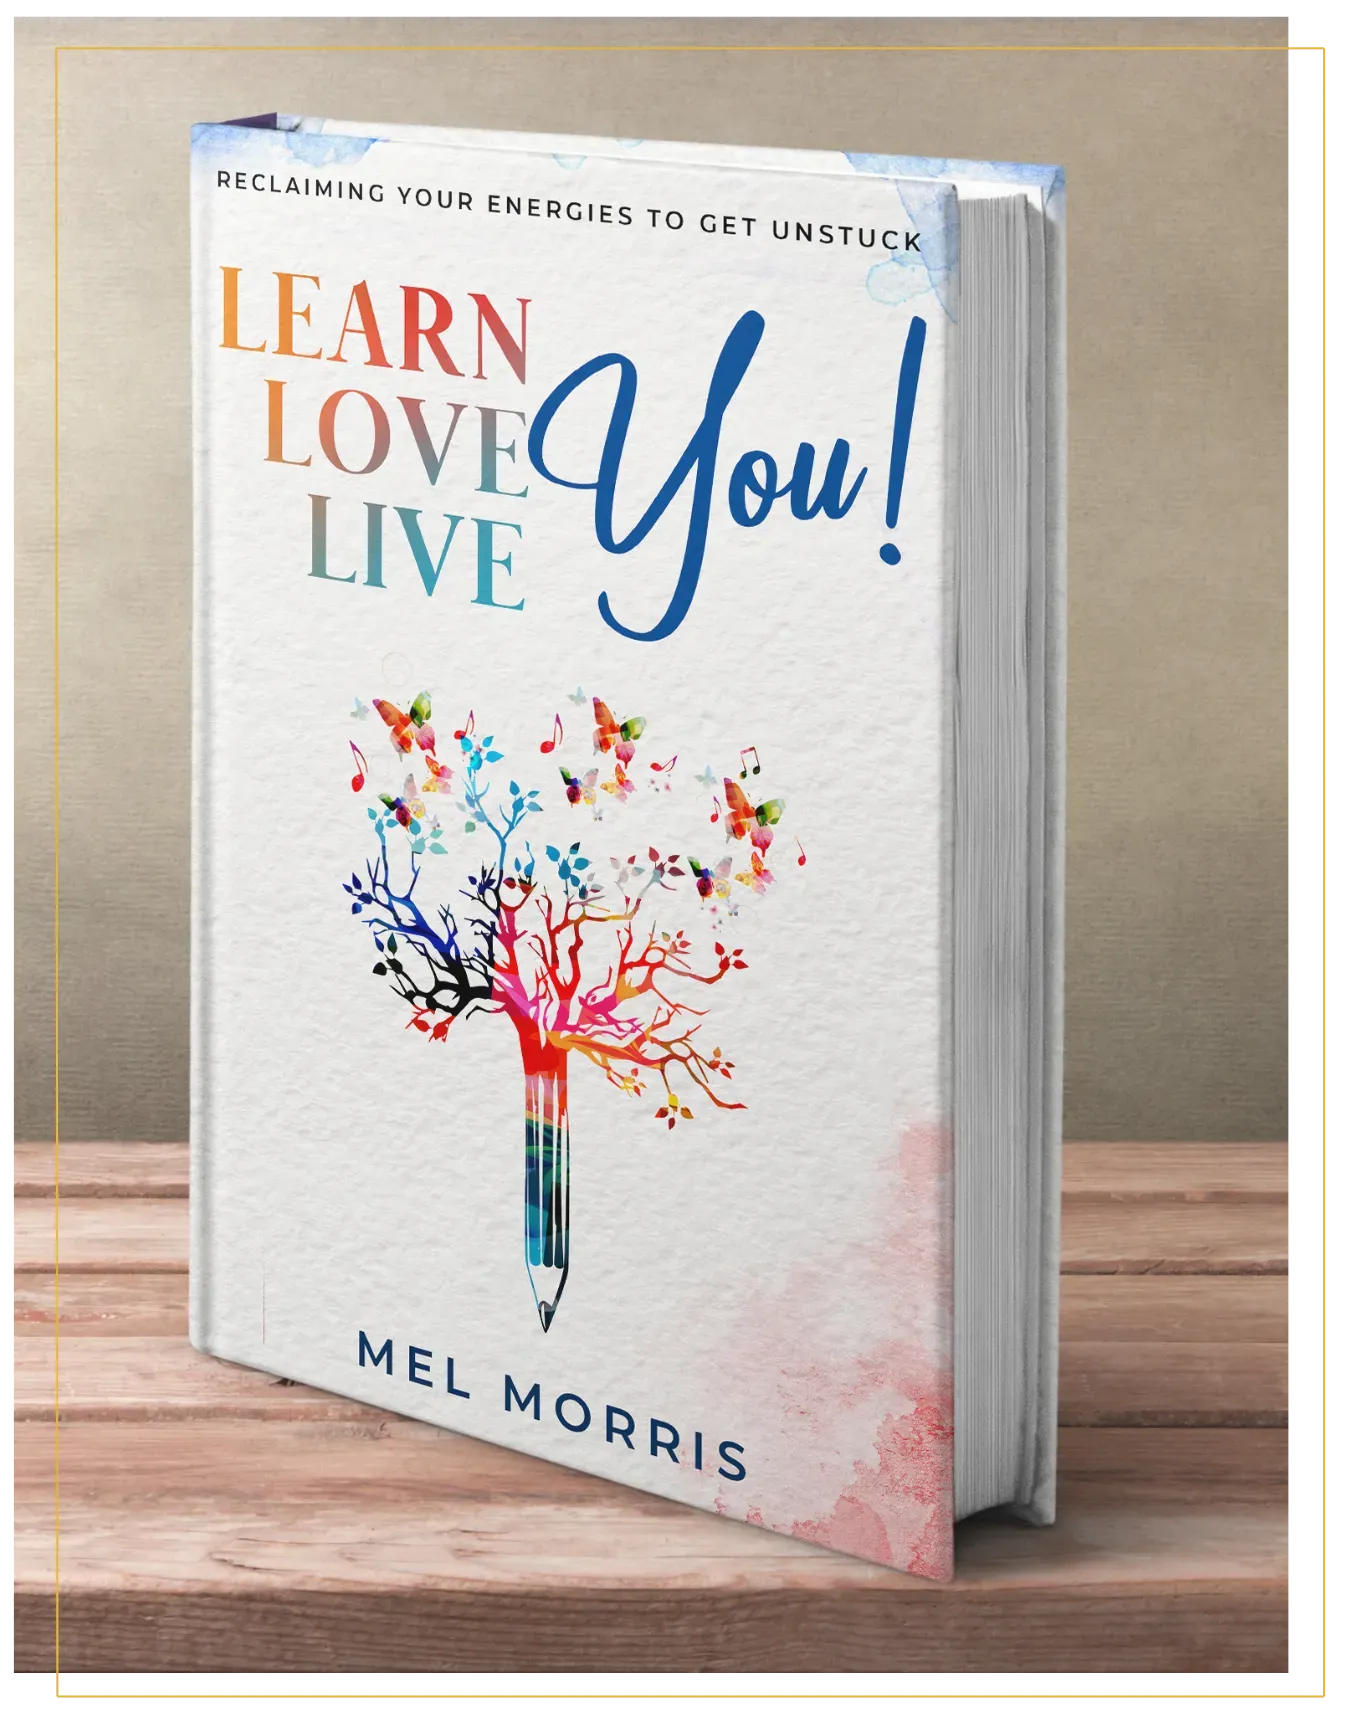 Learn. Love. Live You! Book on display